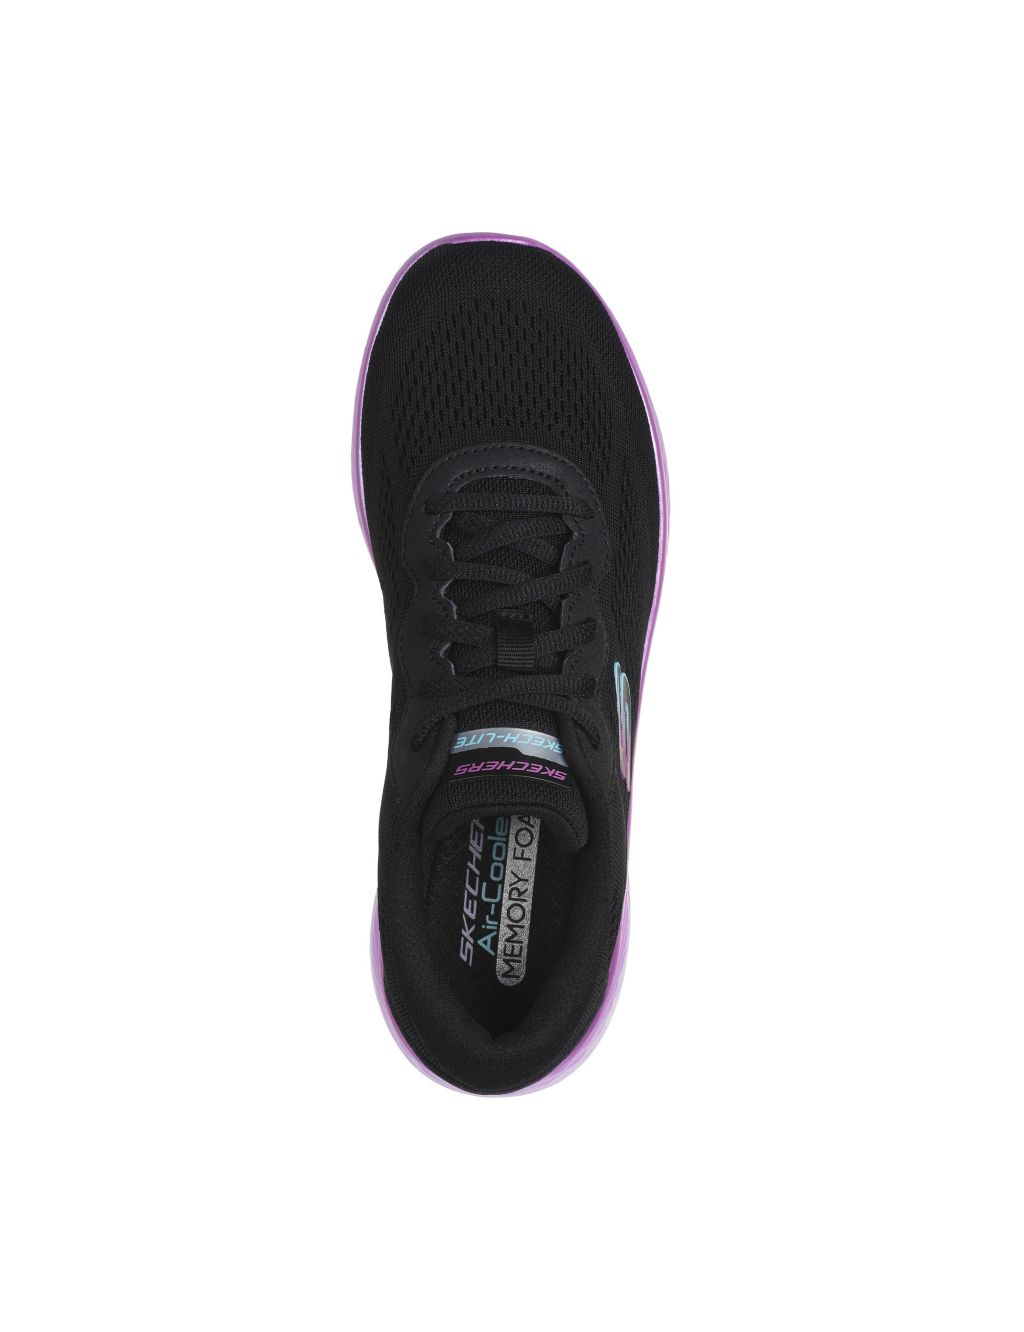 Skech-Lite Pro Stunning Steps Trainers image 4